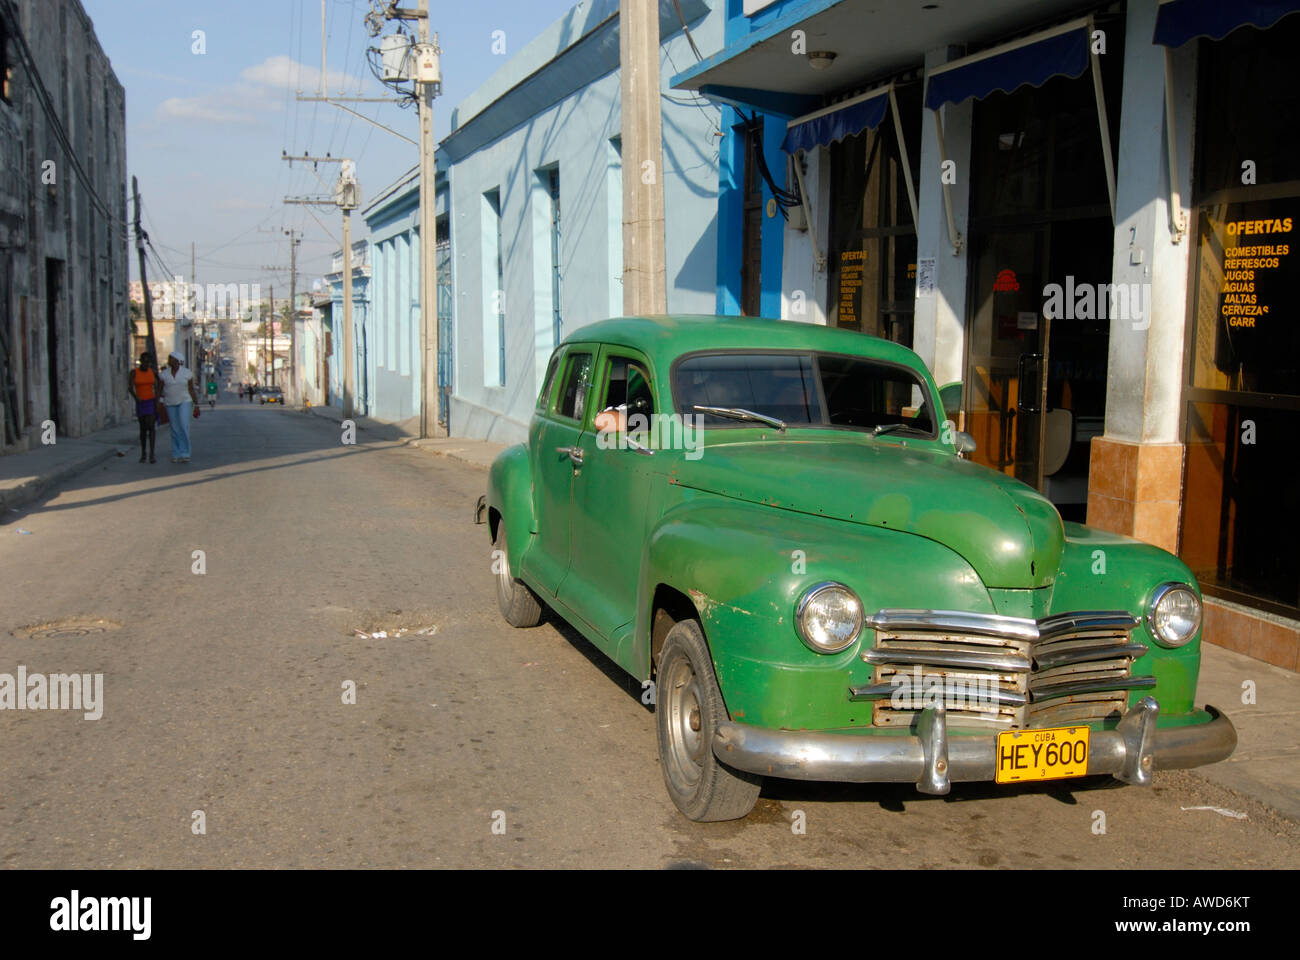 Green vintage car parked on a street in Cienfuegos, Cuba, Caribbean, Americas Stock Photo